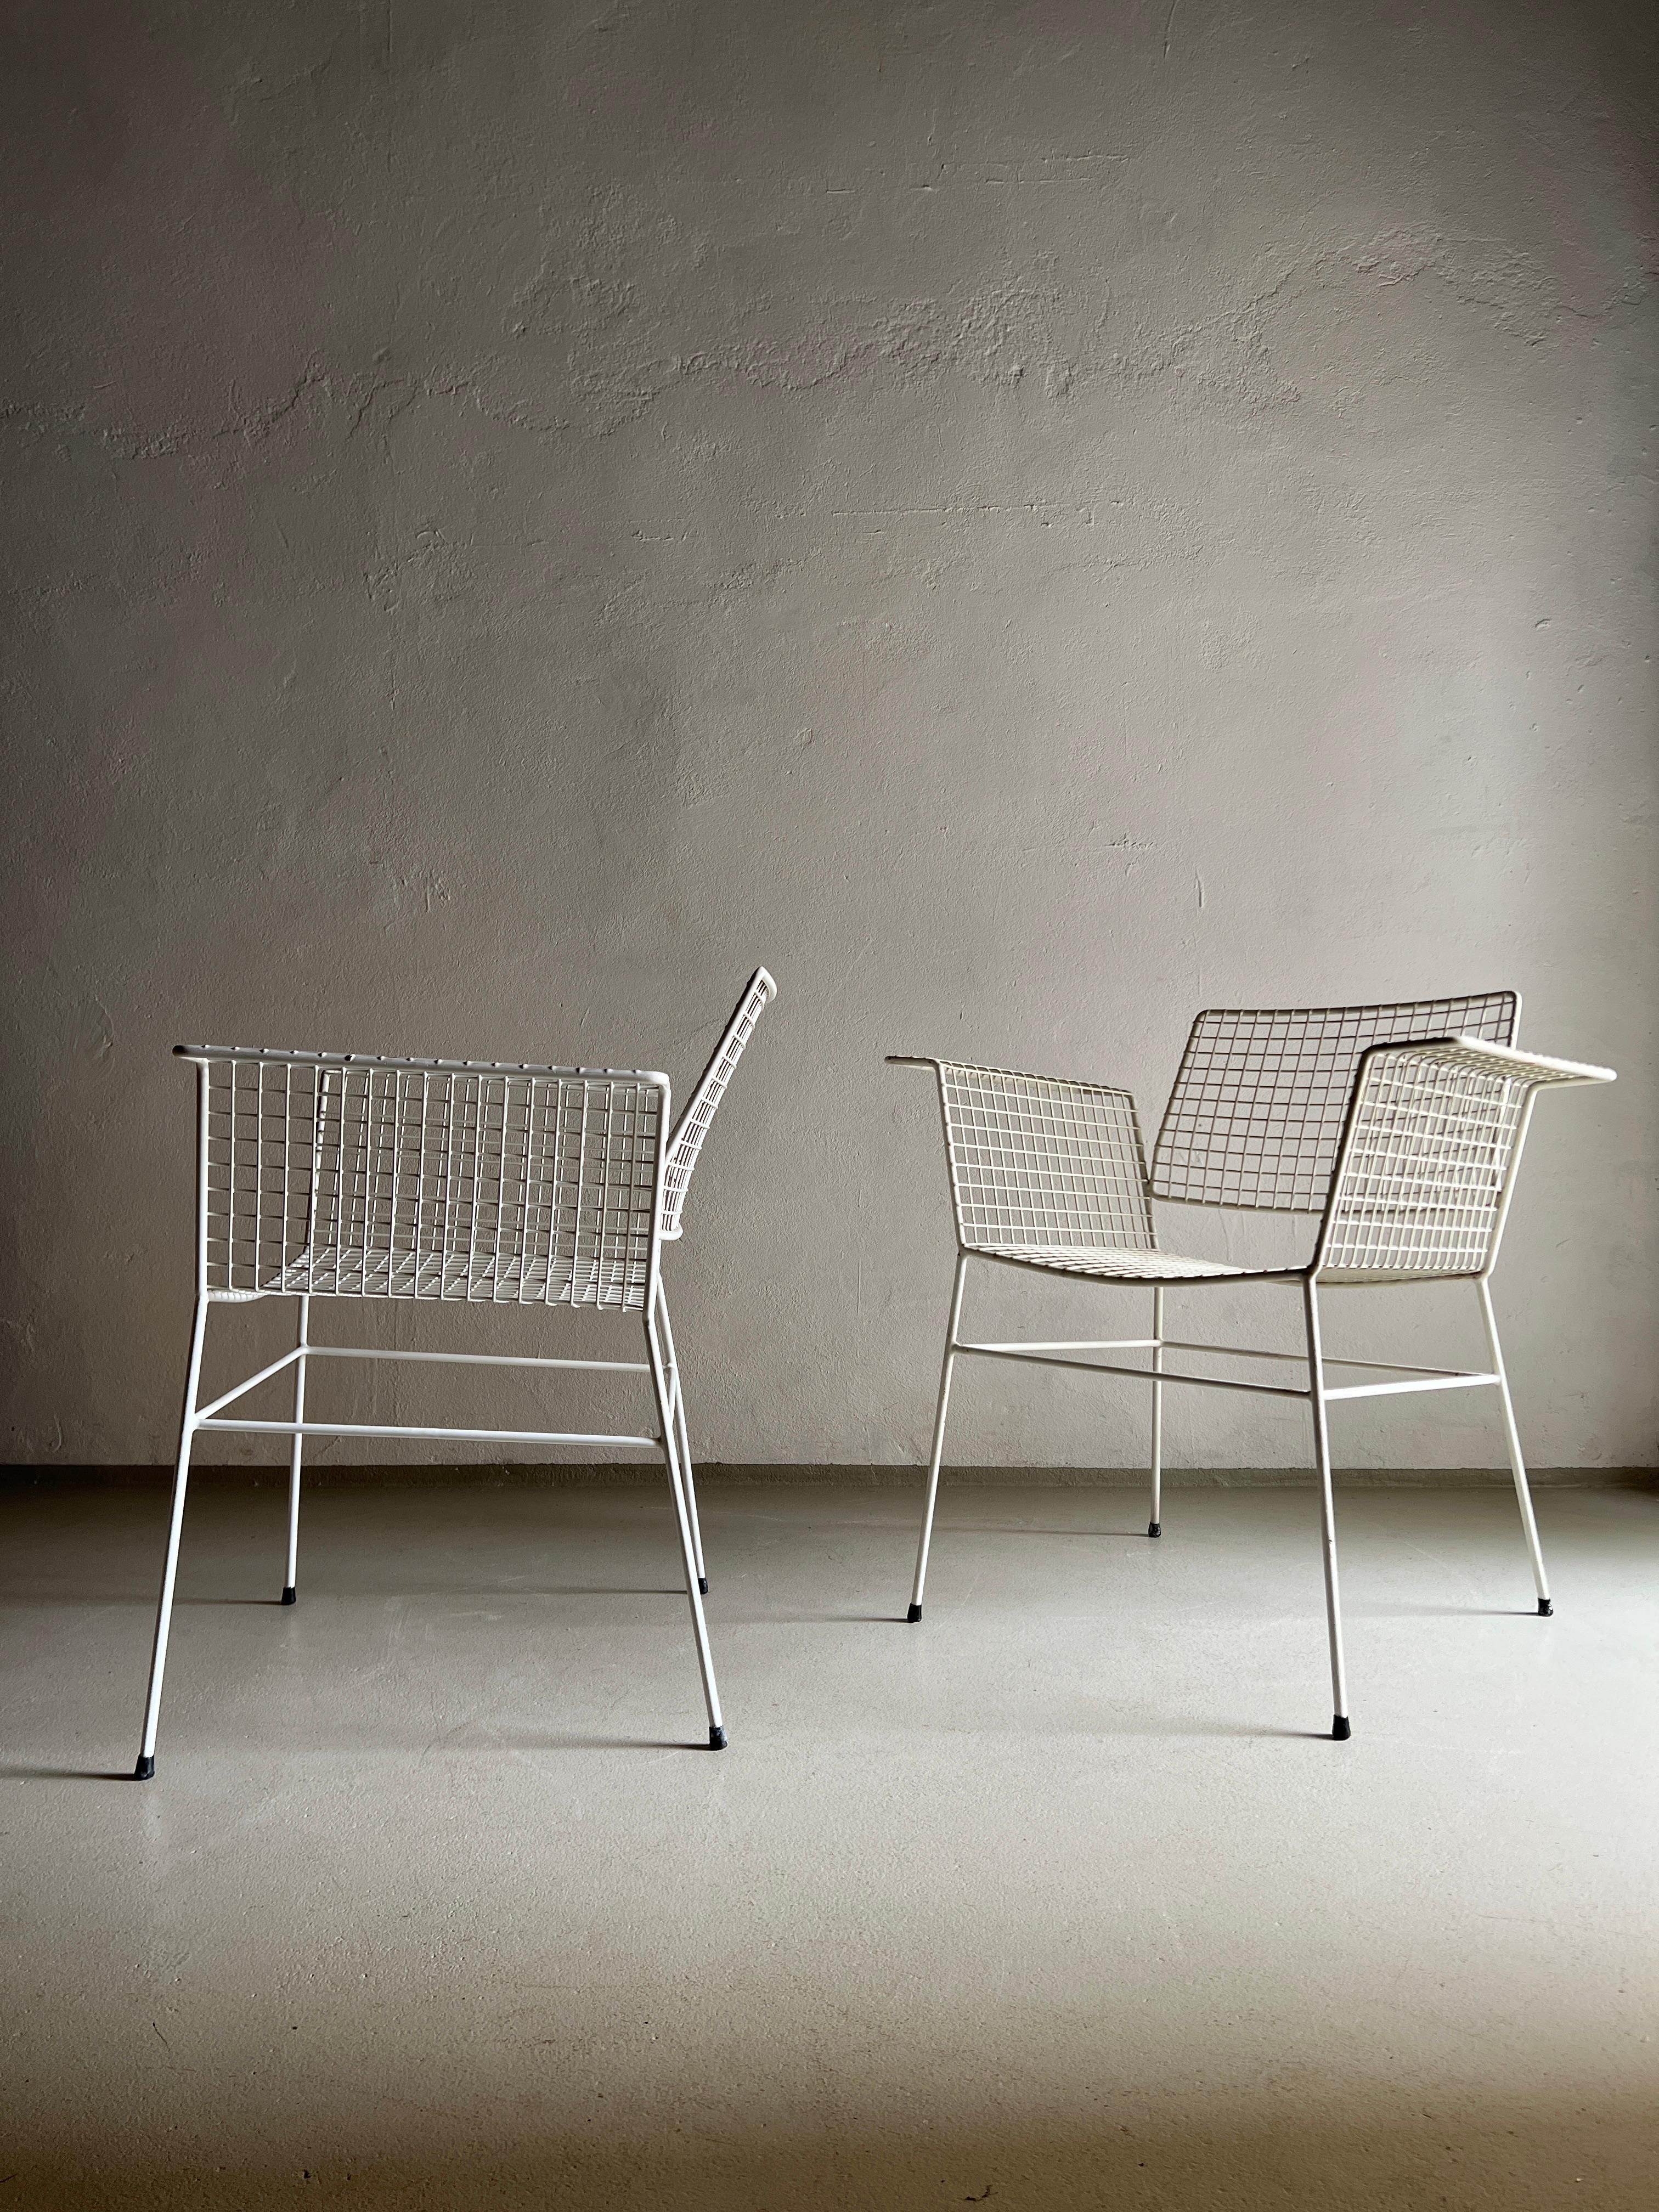 1 of 4 white metal wire chairs from Erlau. The chairs may be used outdoors and inside. 4 chairs are available.

Additional information:
Country of manufacture: Germany
Period: 1960s
Dimensions: 74.5 W x 55 D x  75.5 H cm
Seat: 44 H cm
Condition: